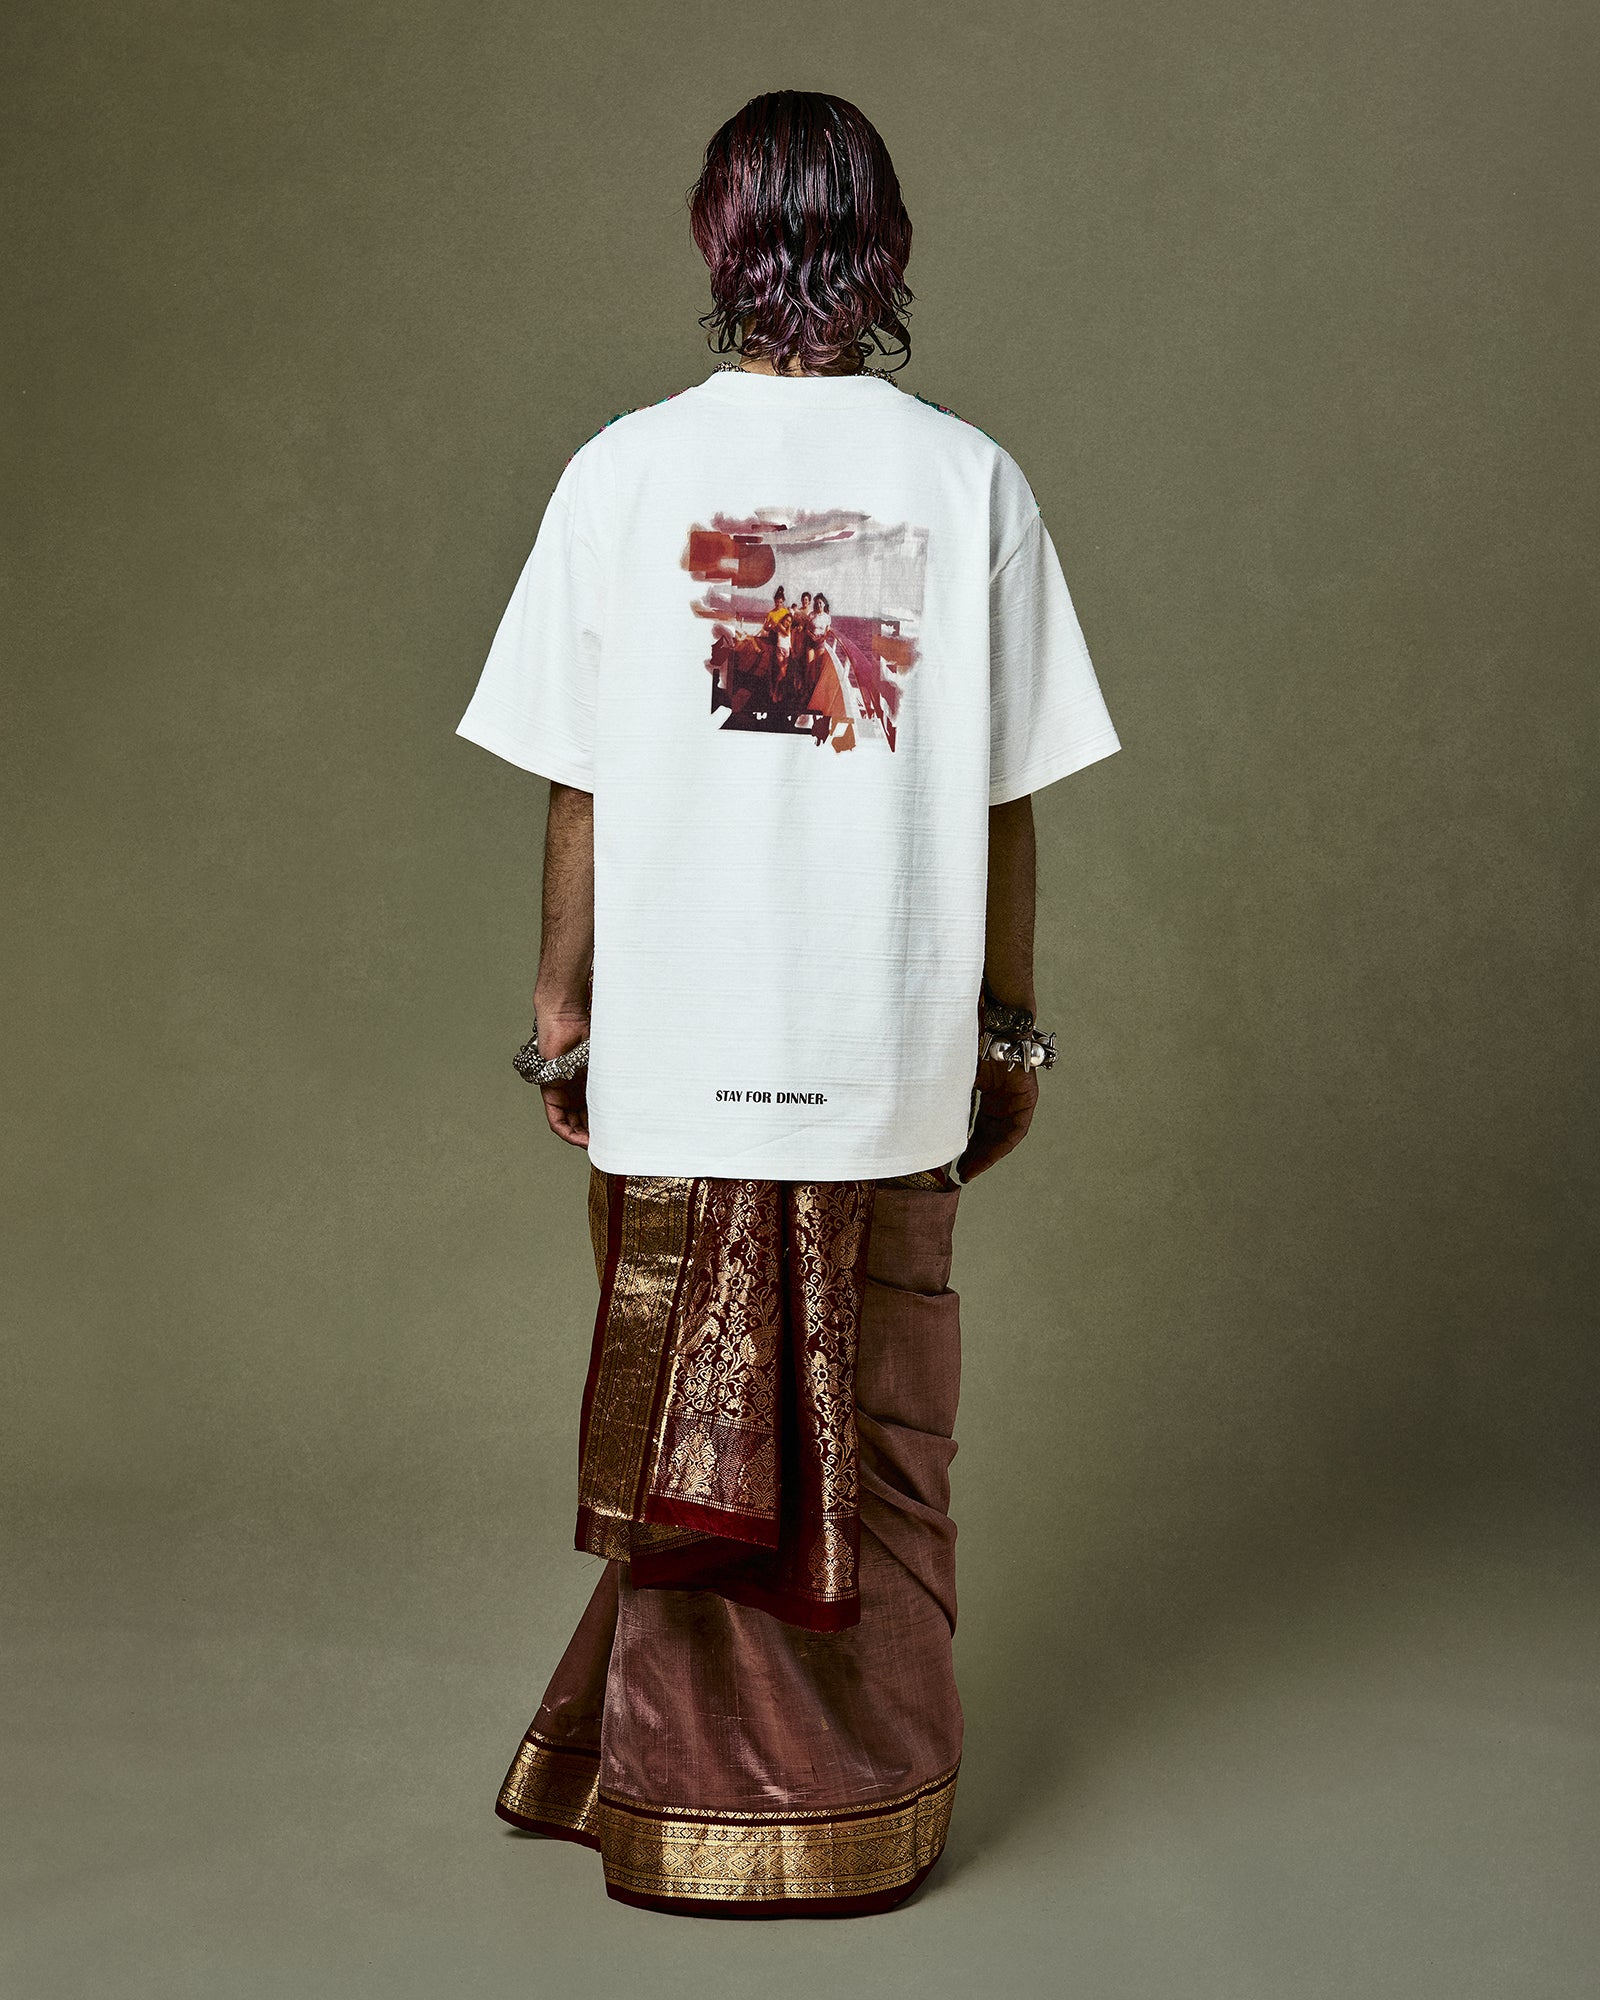 Unique Quinto T-Shirt with saree trimmings, blending the charm of 'Calabria-Sicilia' journey with the classic 1960s polaroid print - a celebration of sustainable fashion.